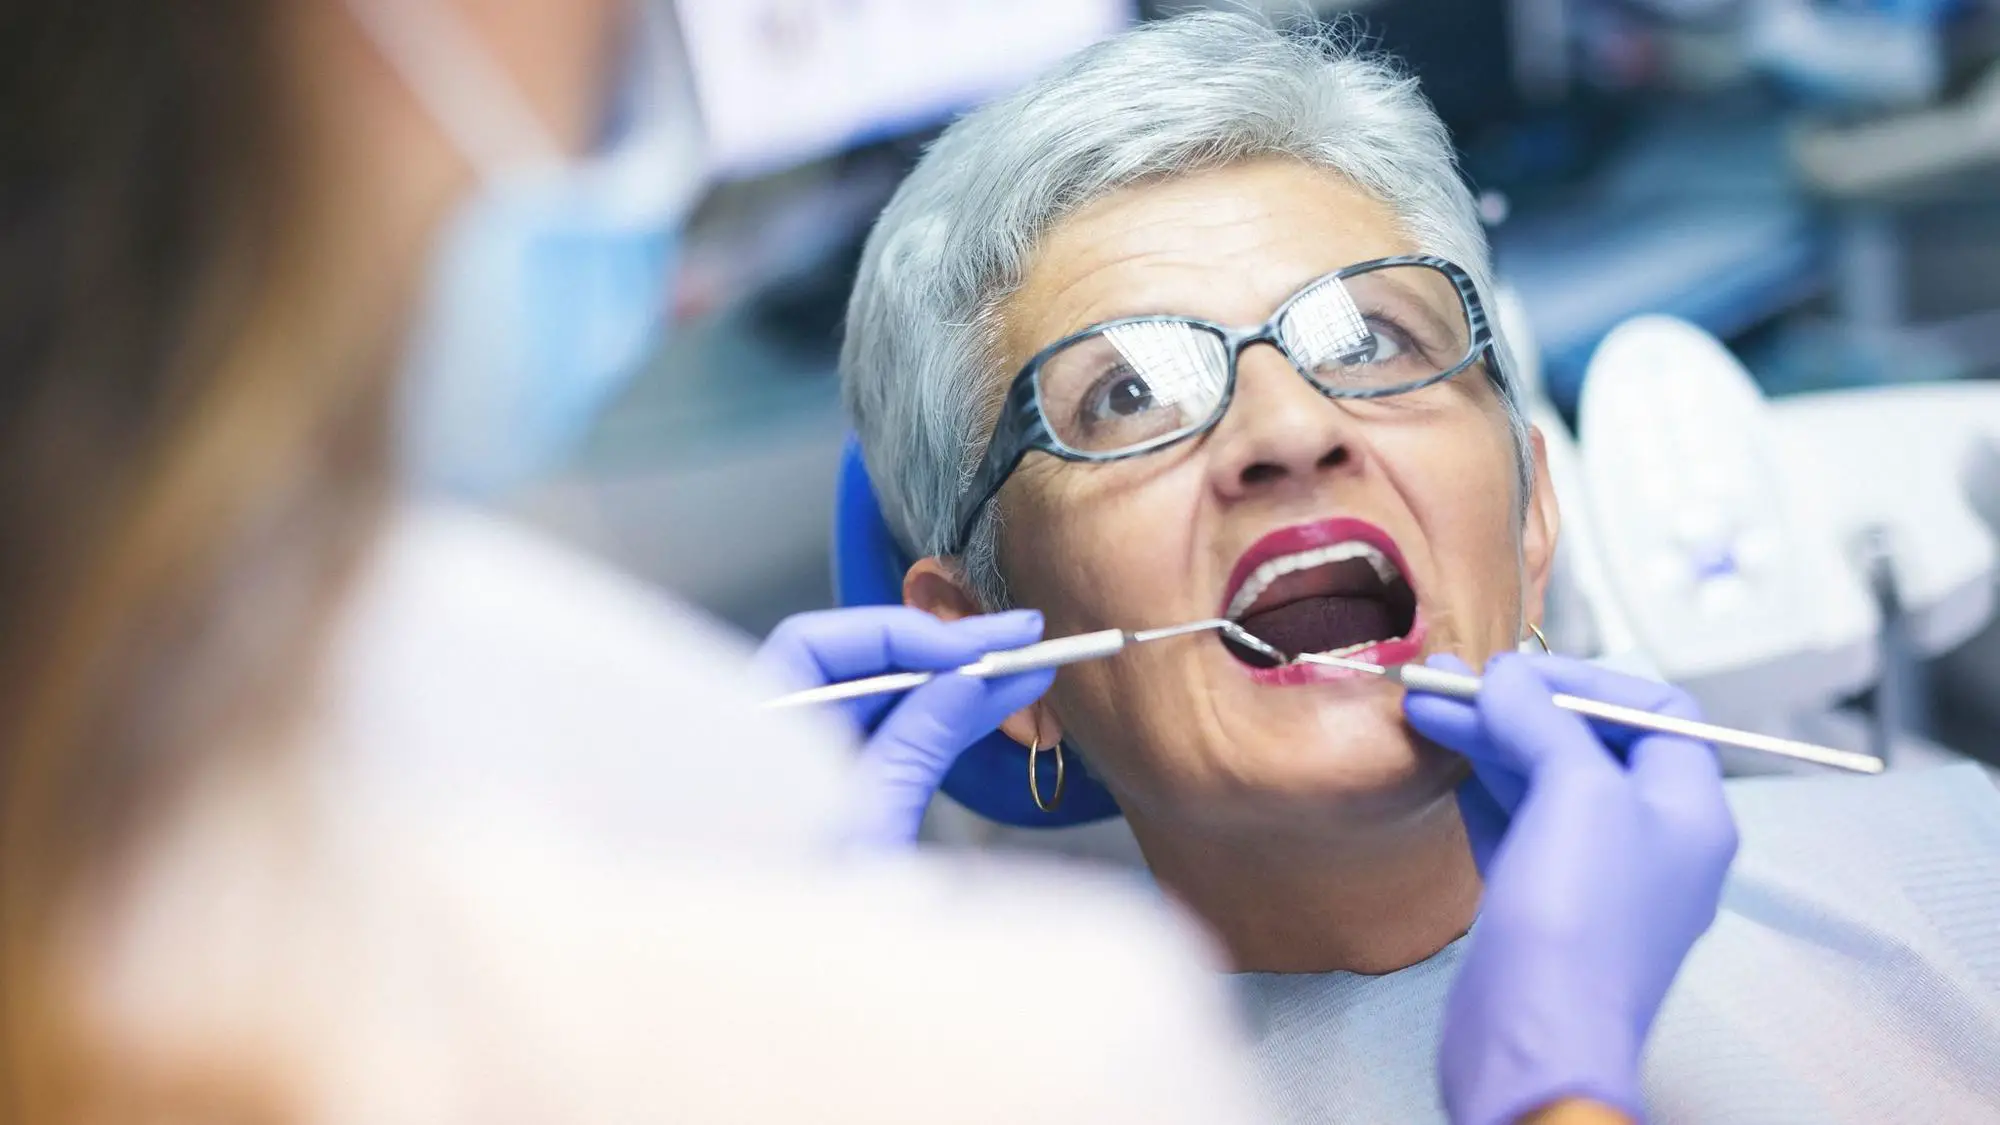 One change to dental care that could save lives, money ...